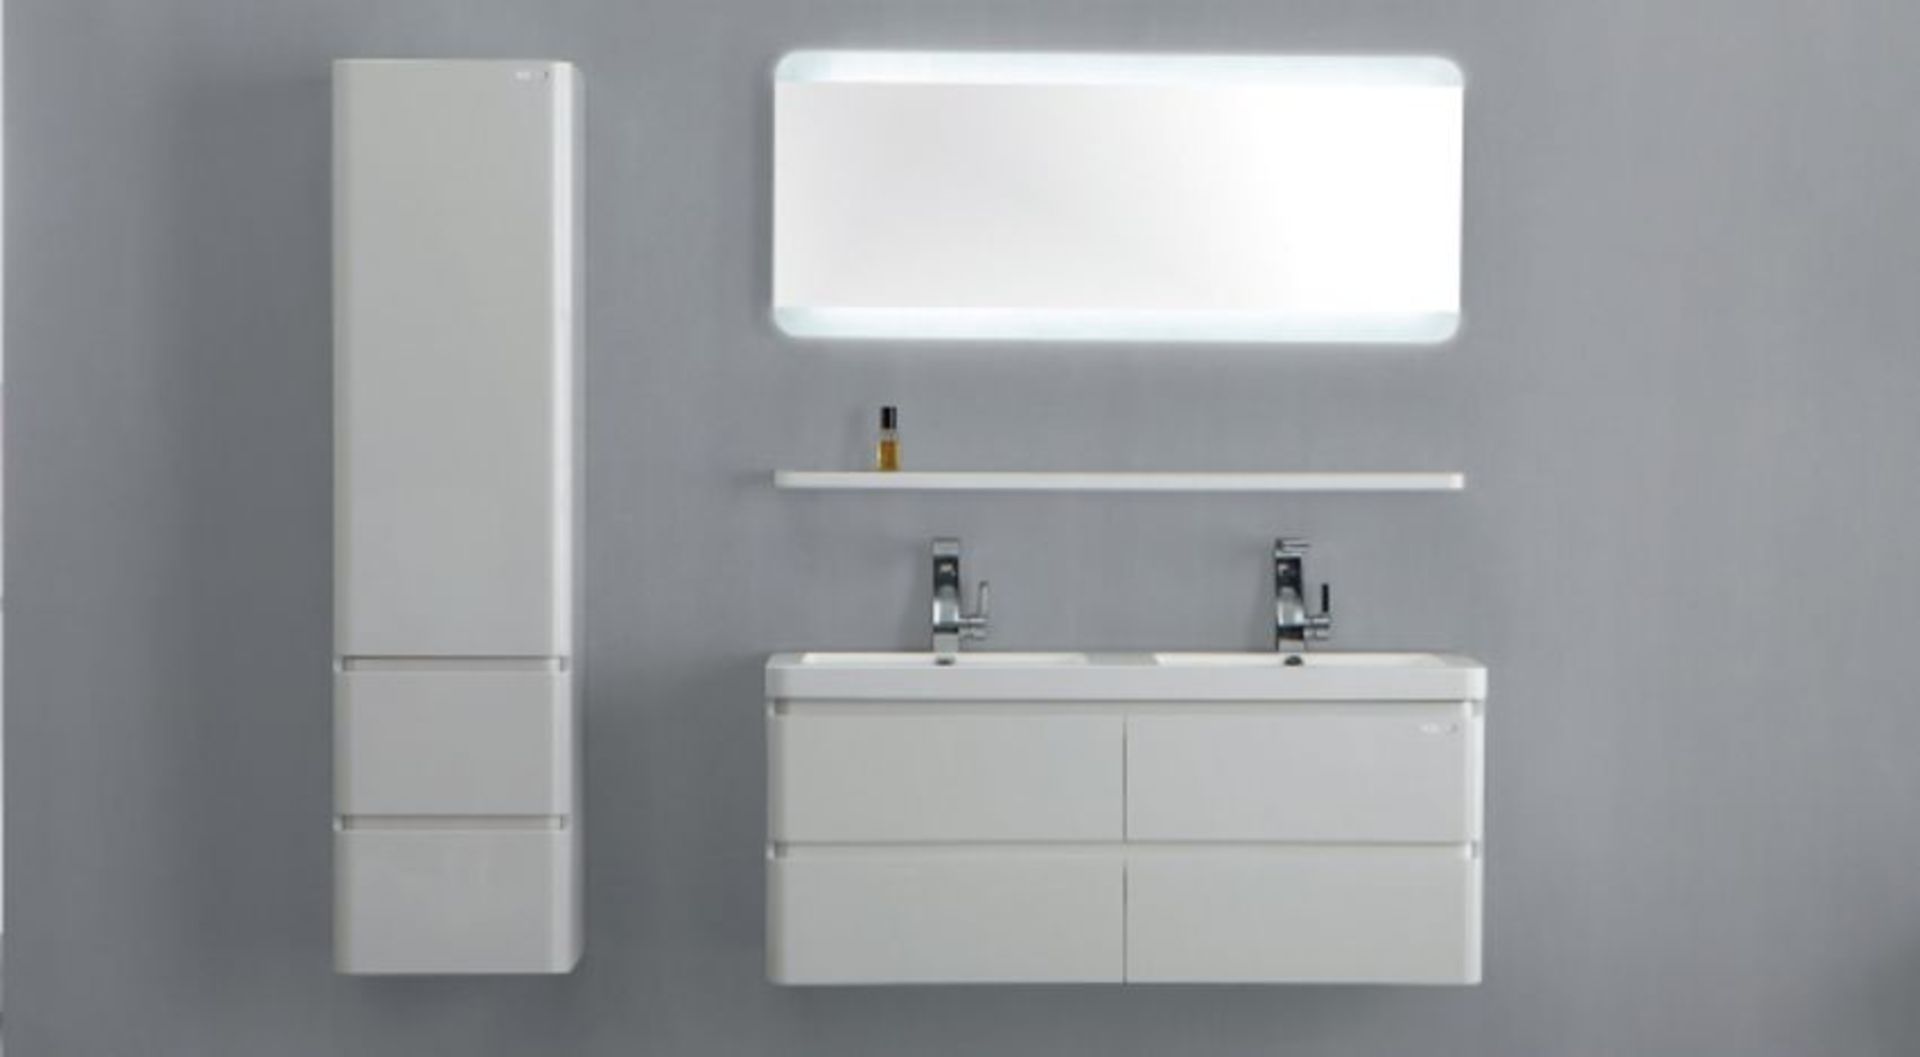 1 x Austin Bathrooms EDGE Backlit 600mm Illuminated Wall Mirror With No Touch Sensors RRP £230 - Image 3 of 3